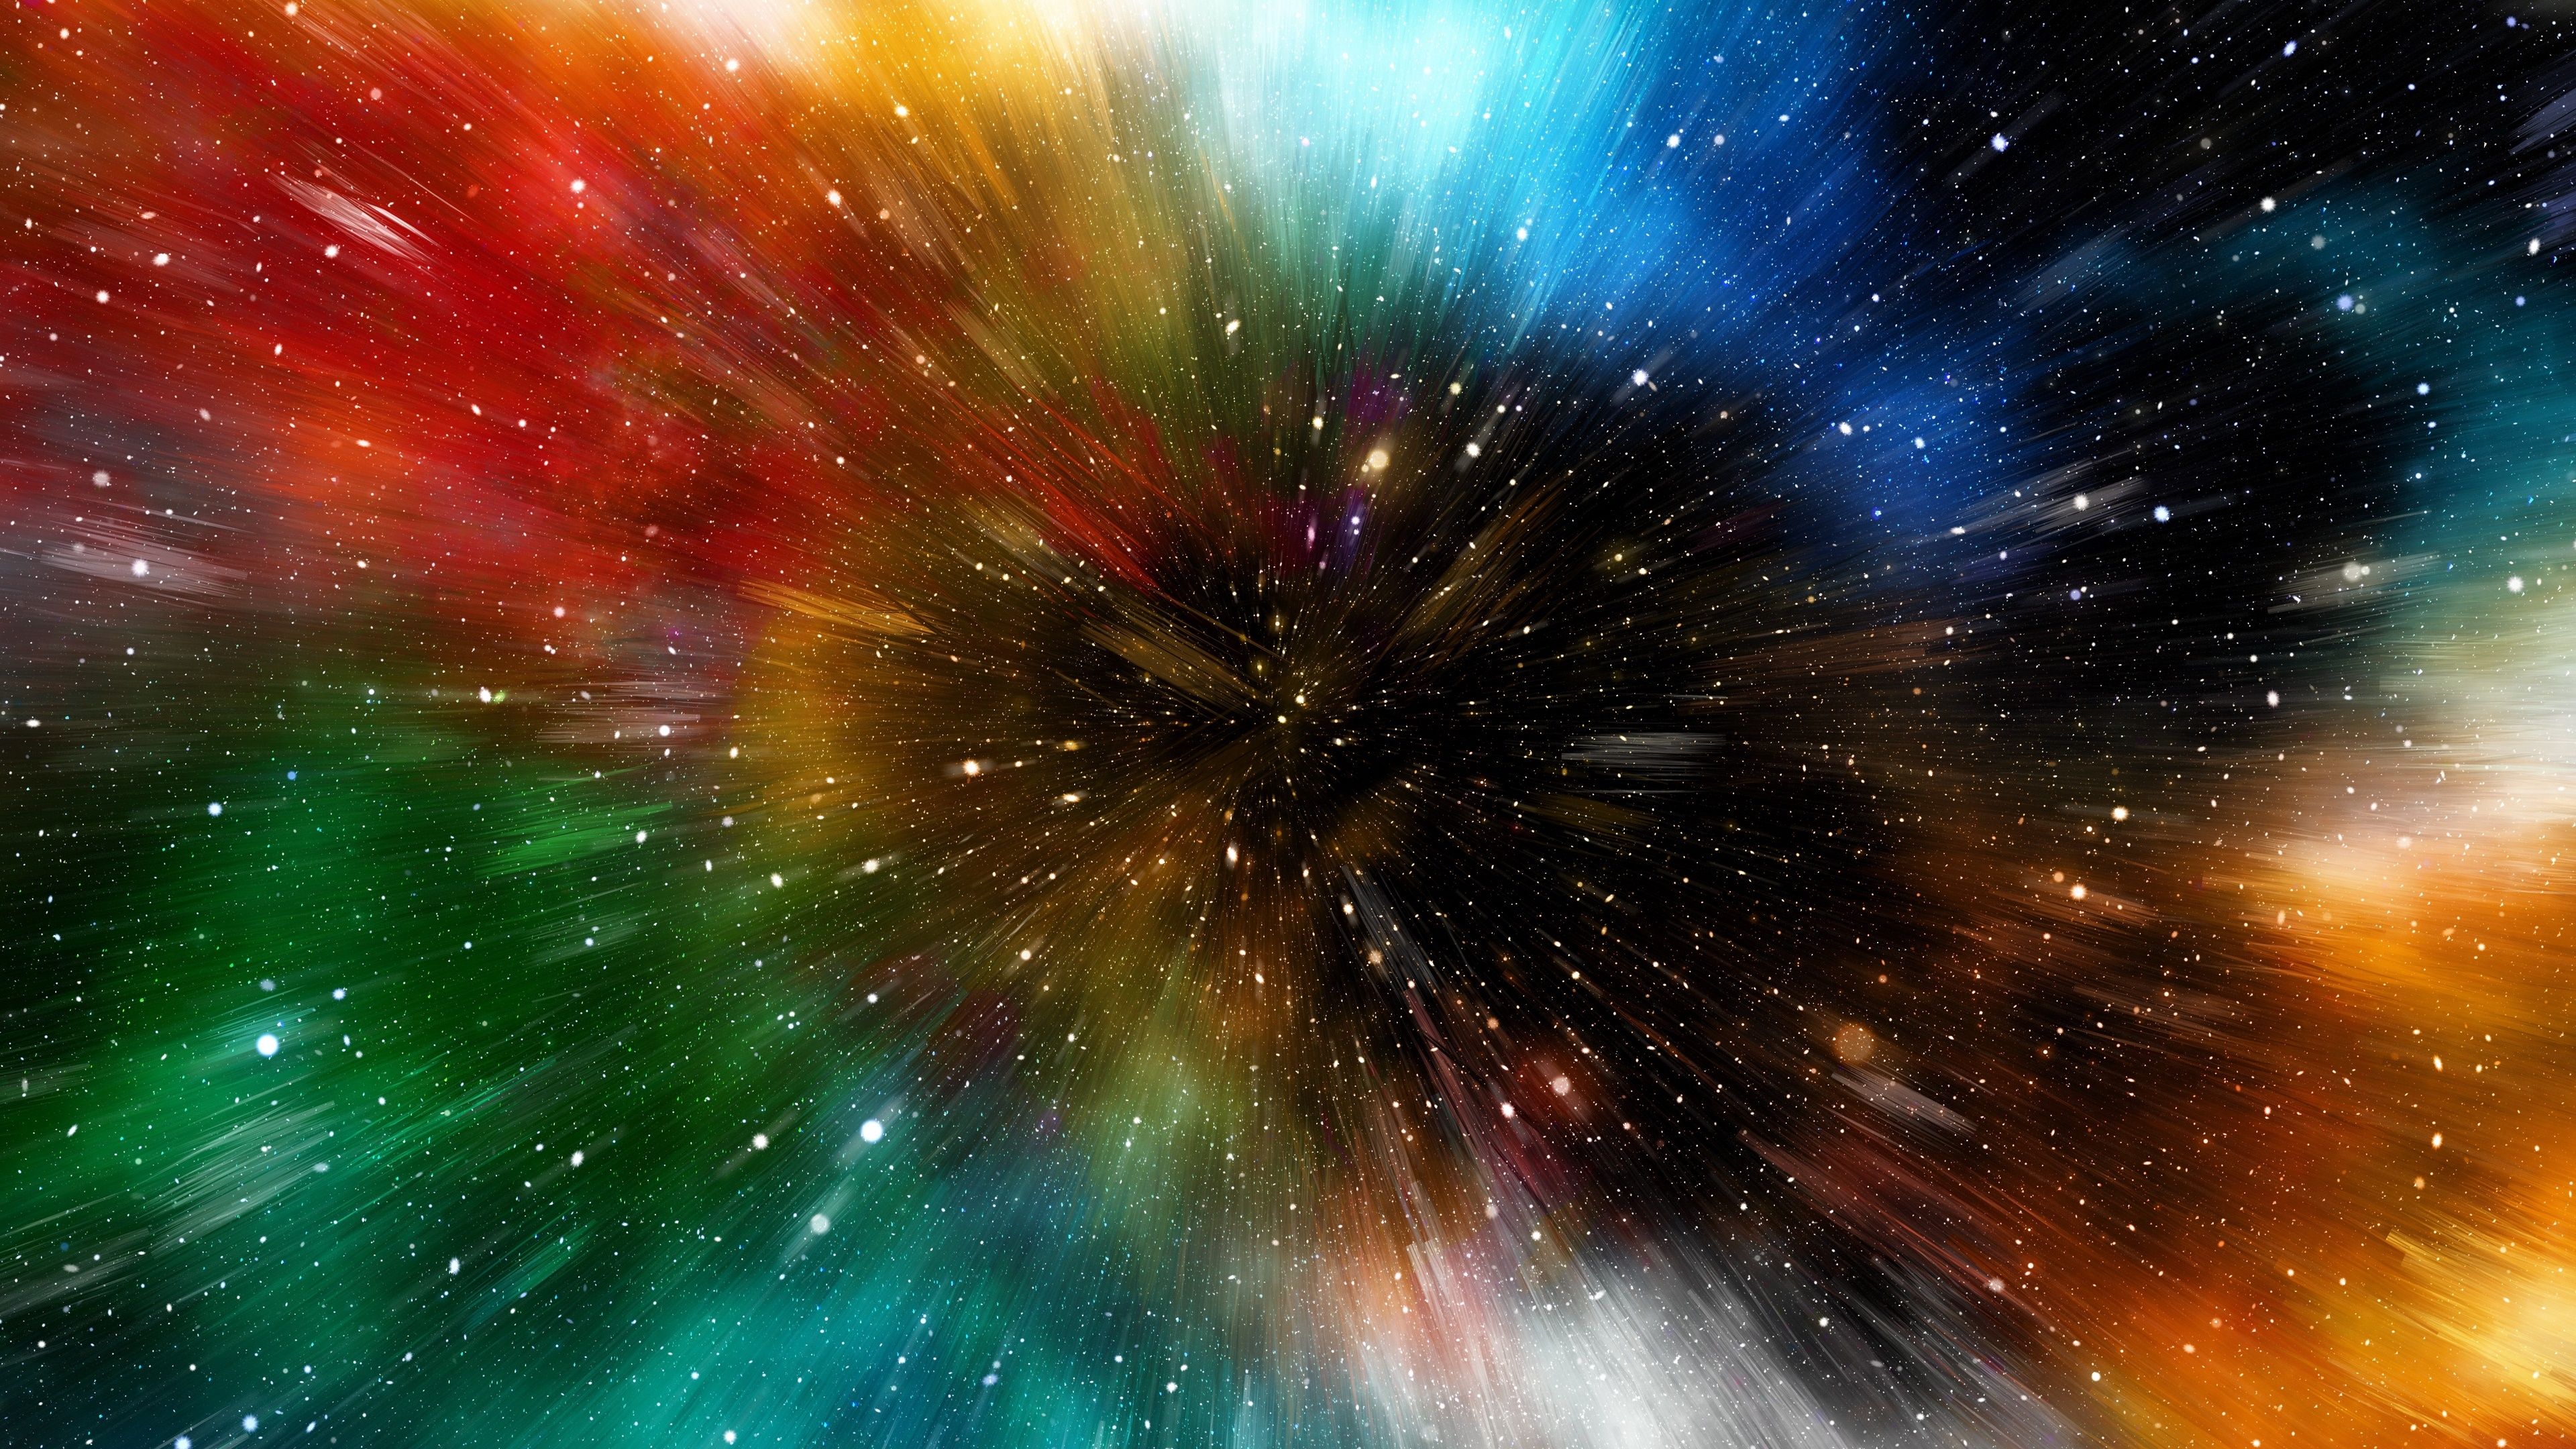 Wallpaper 4k Stars Motion Colorful Abstract 4k Wallpaper, Abstract Wallpaper, Artist Wallpaper, Artwork Wallpaper, Colorful Wallpaper, Digital Art Wallpaper, Hd Wallpaper, Stars Wallpaper